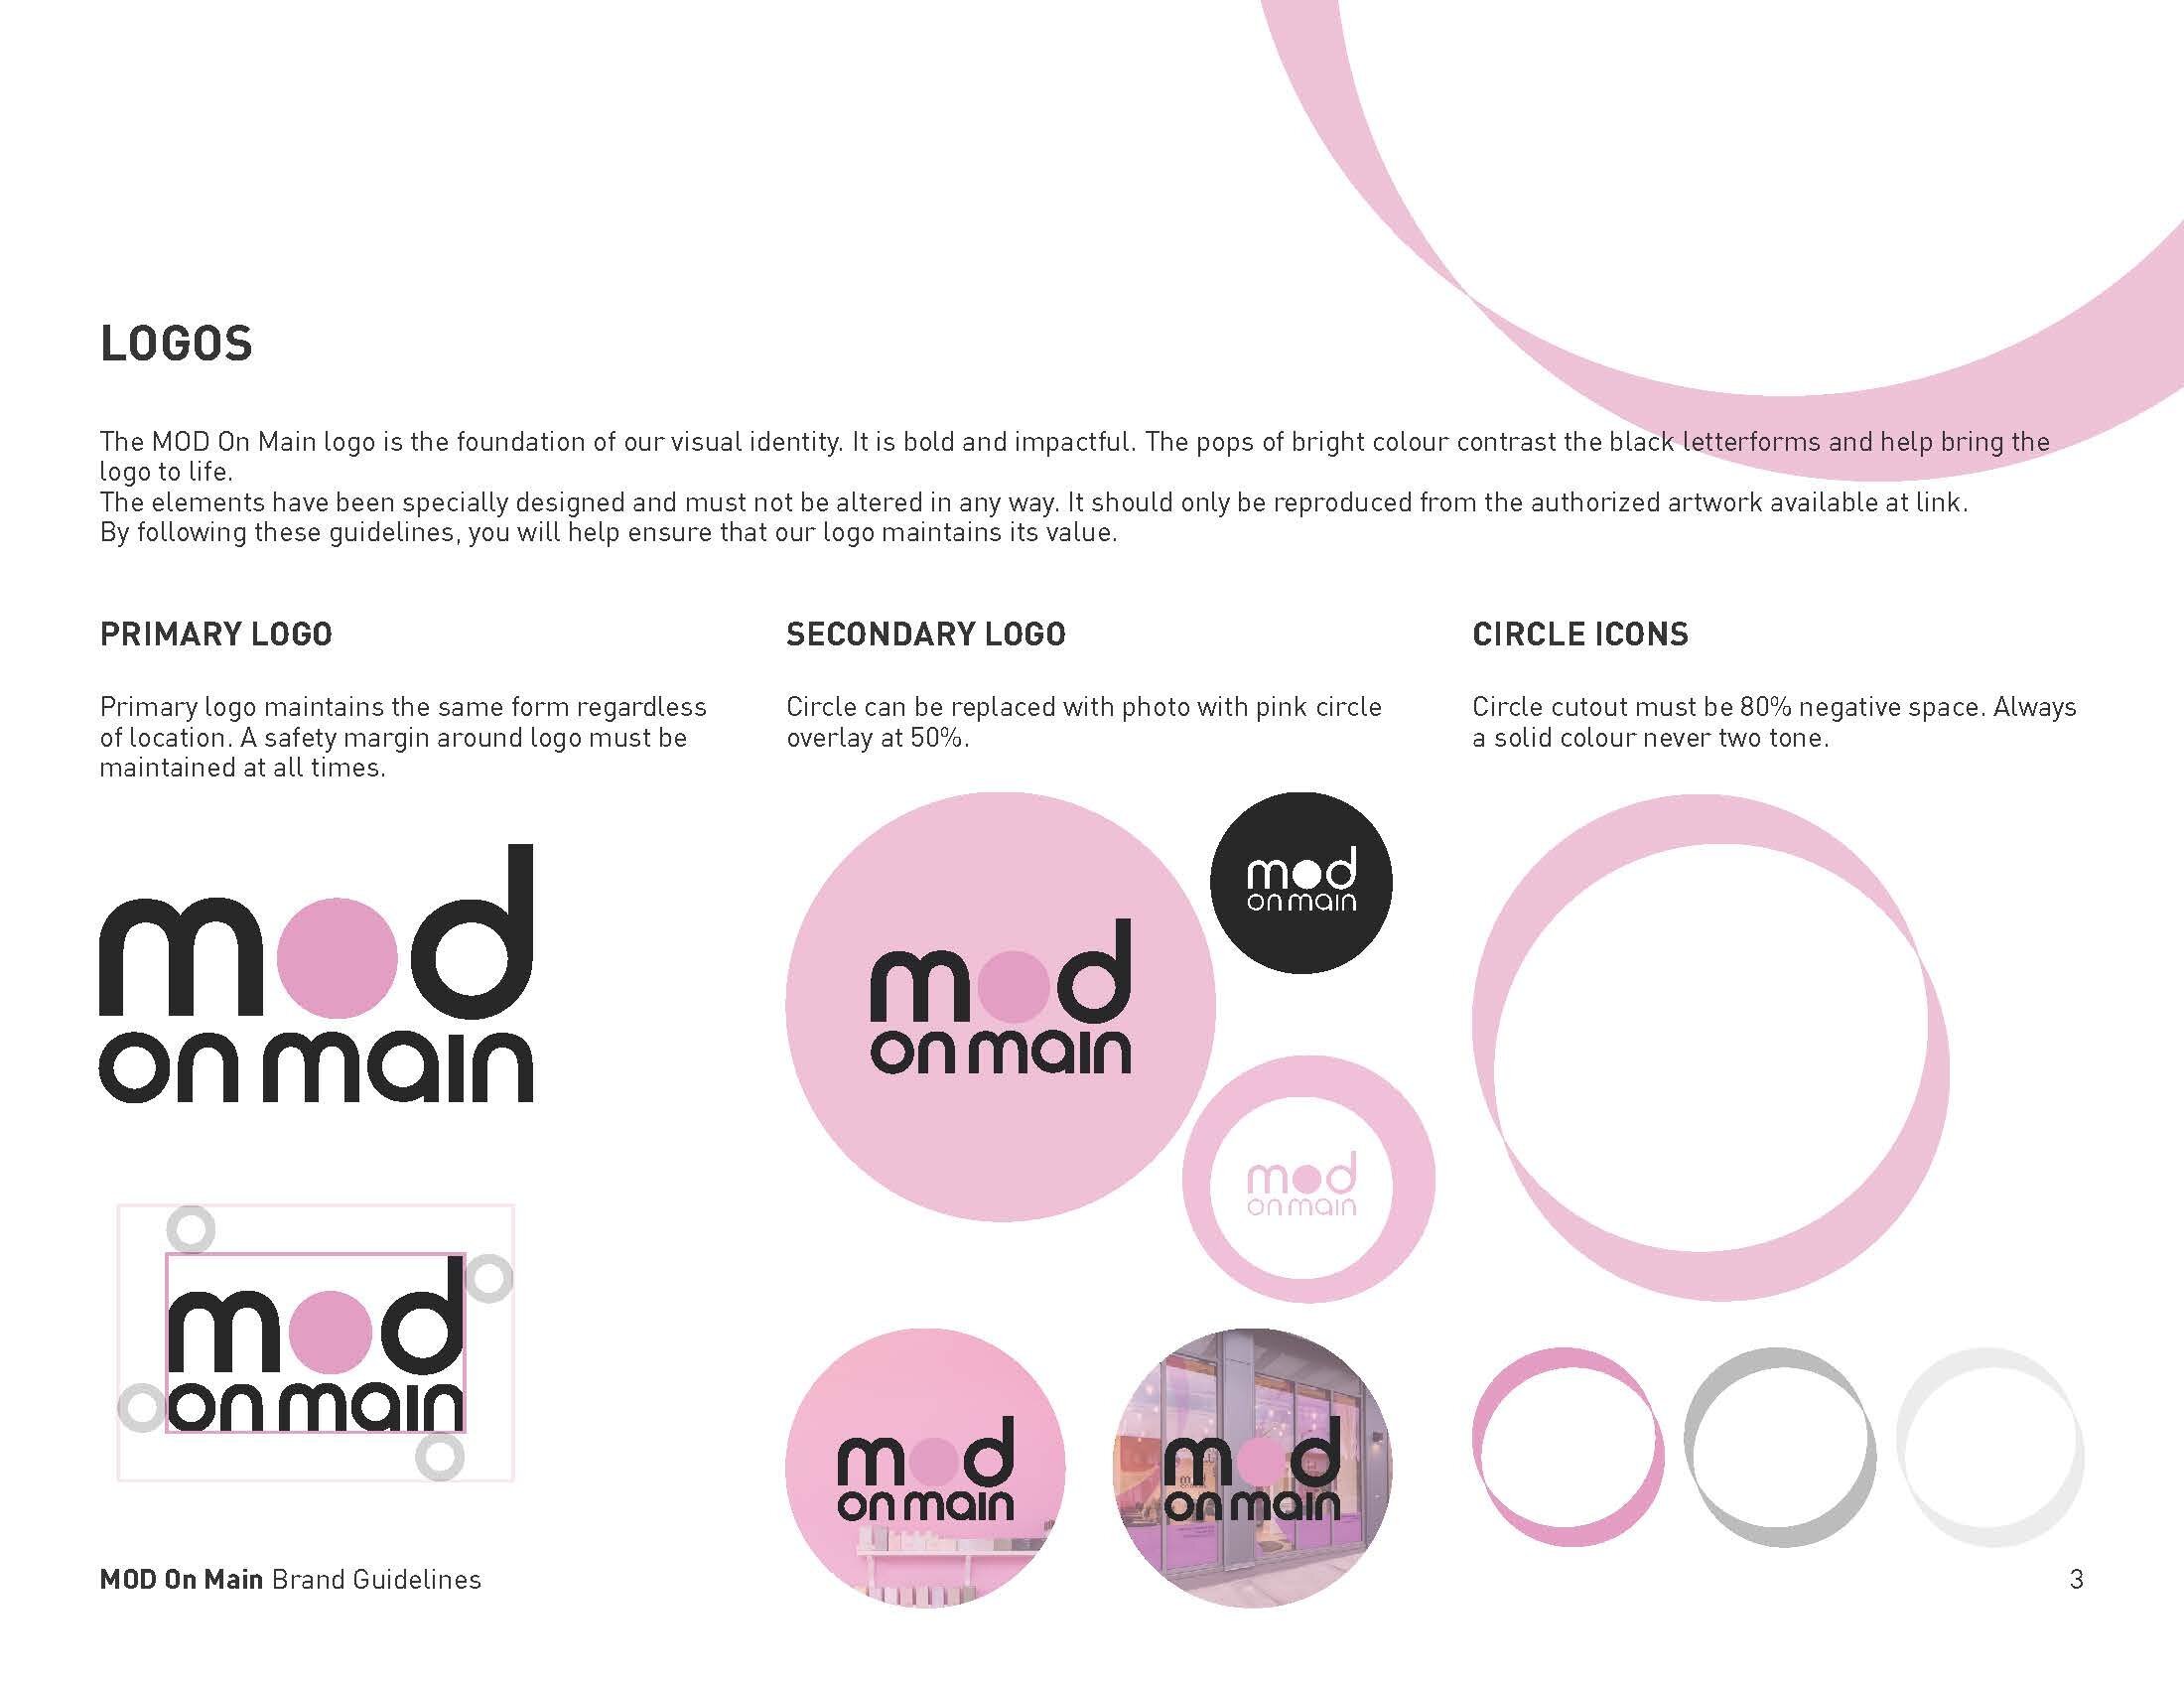 MOD On Main Brand Guidelines 28-01-2021_Page_3.jpg